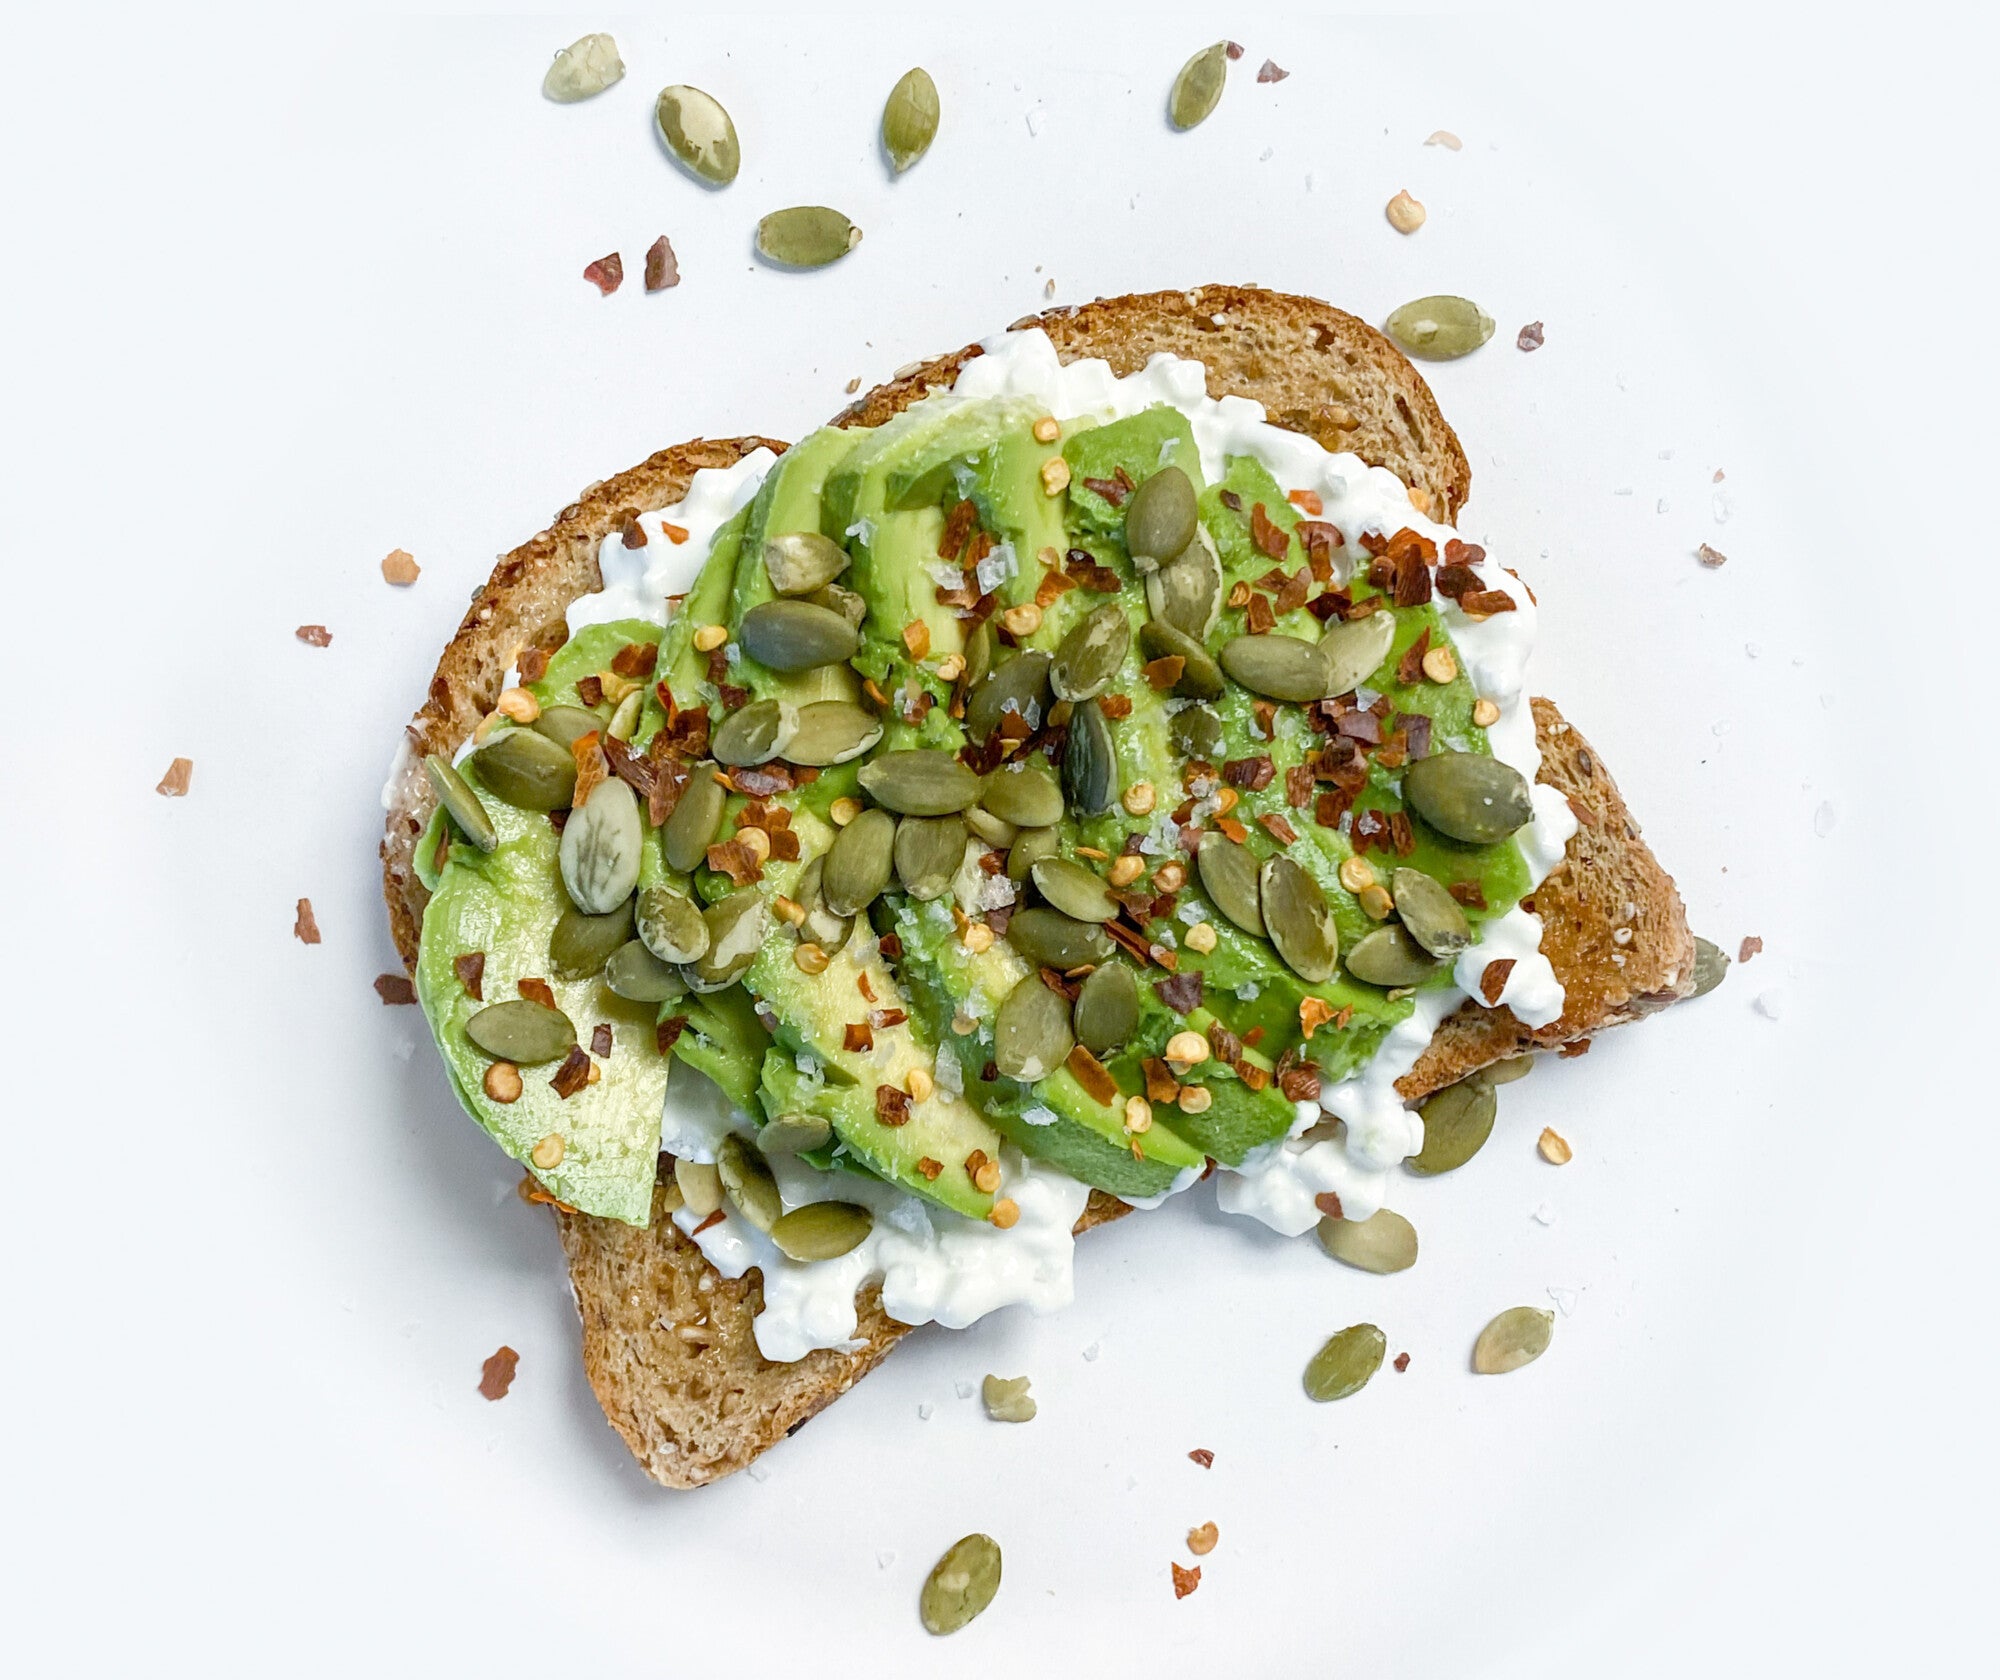 Avocado Toast to Die For… Literally